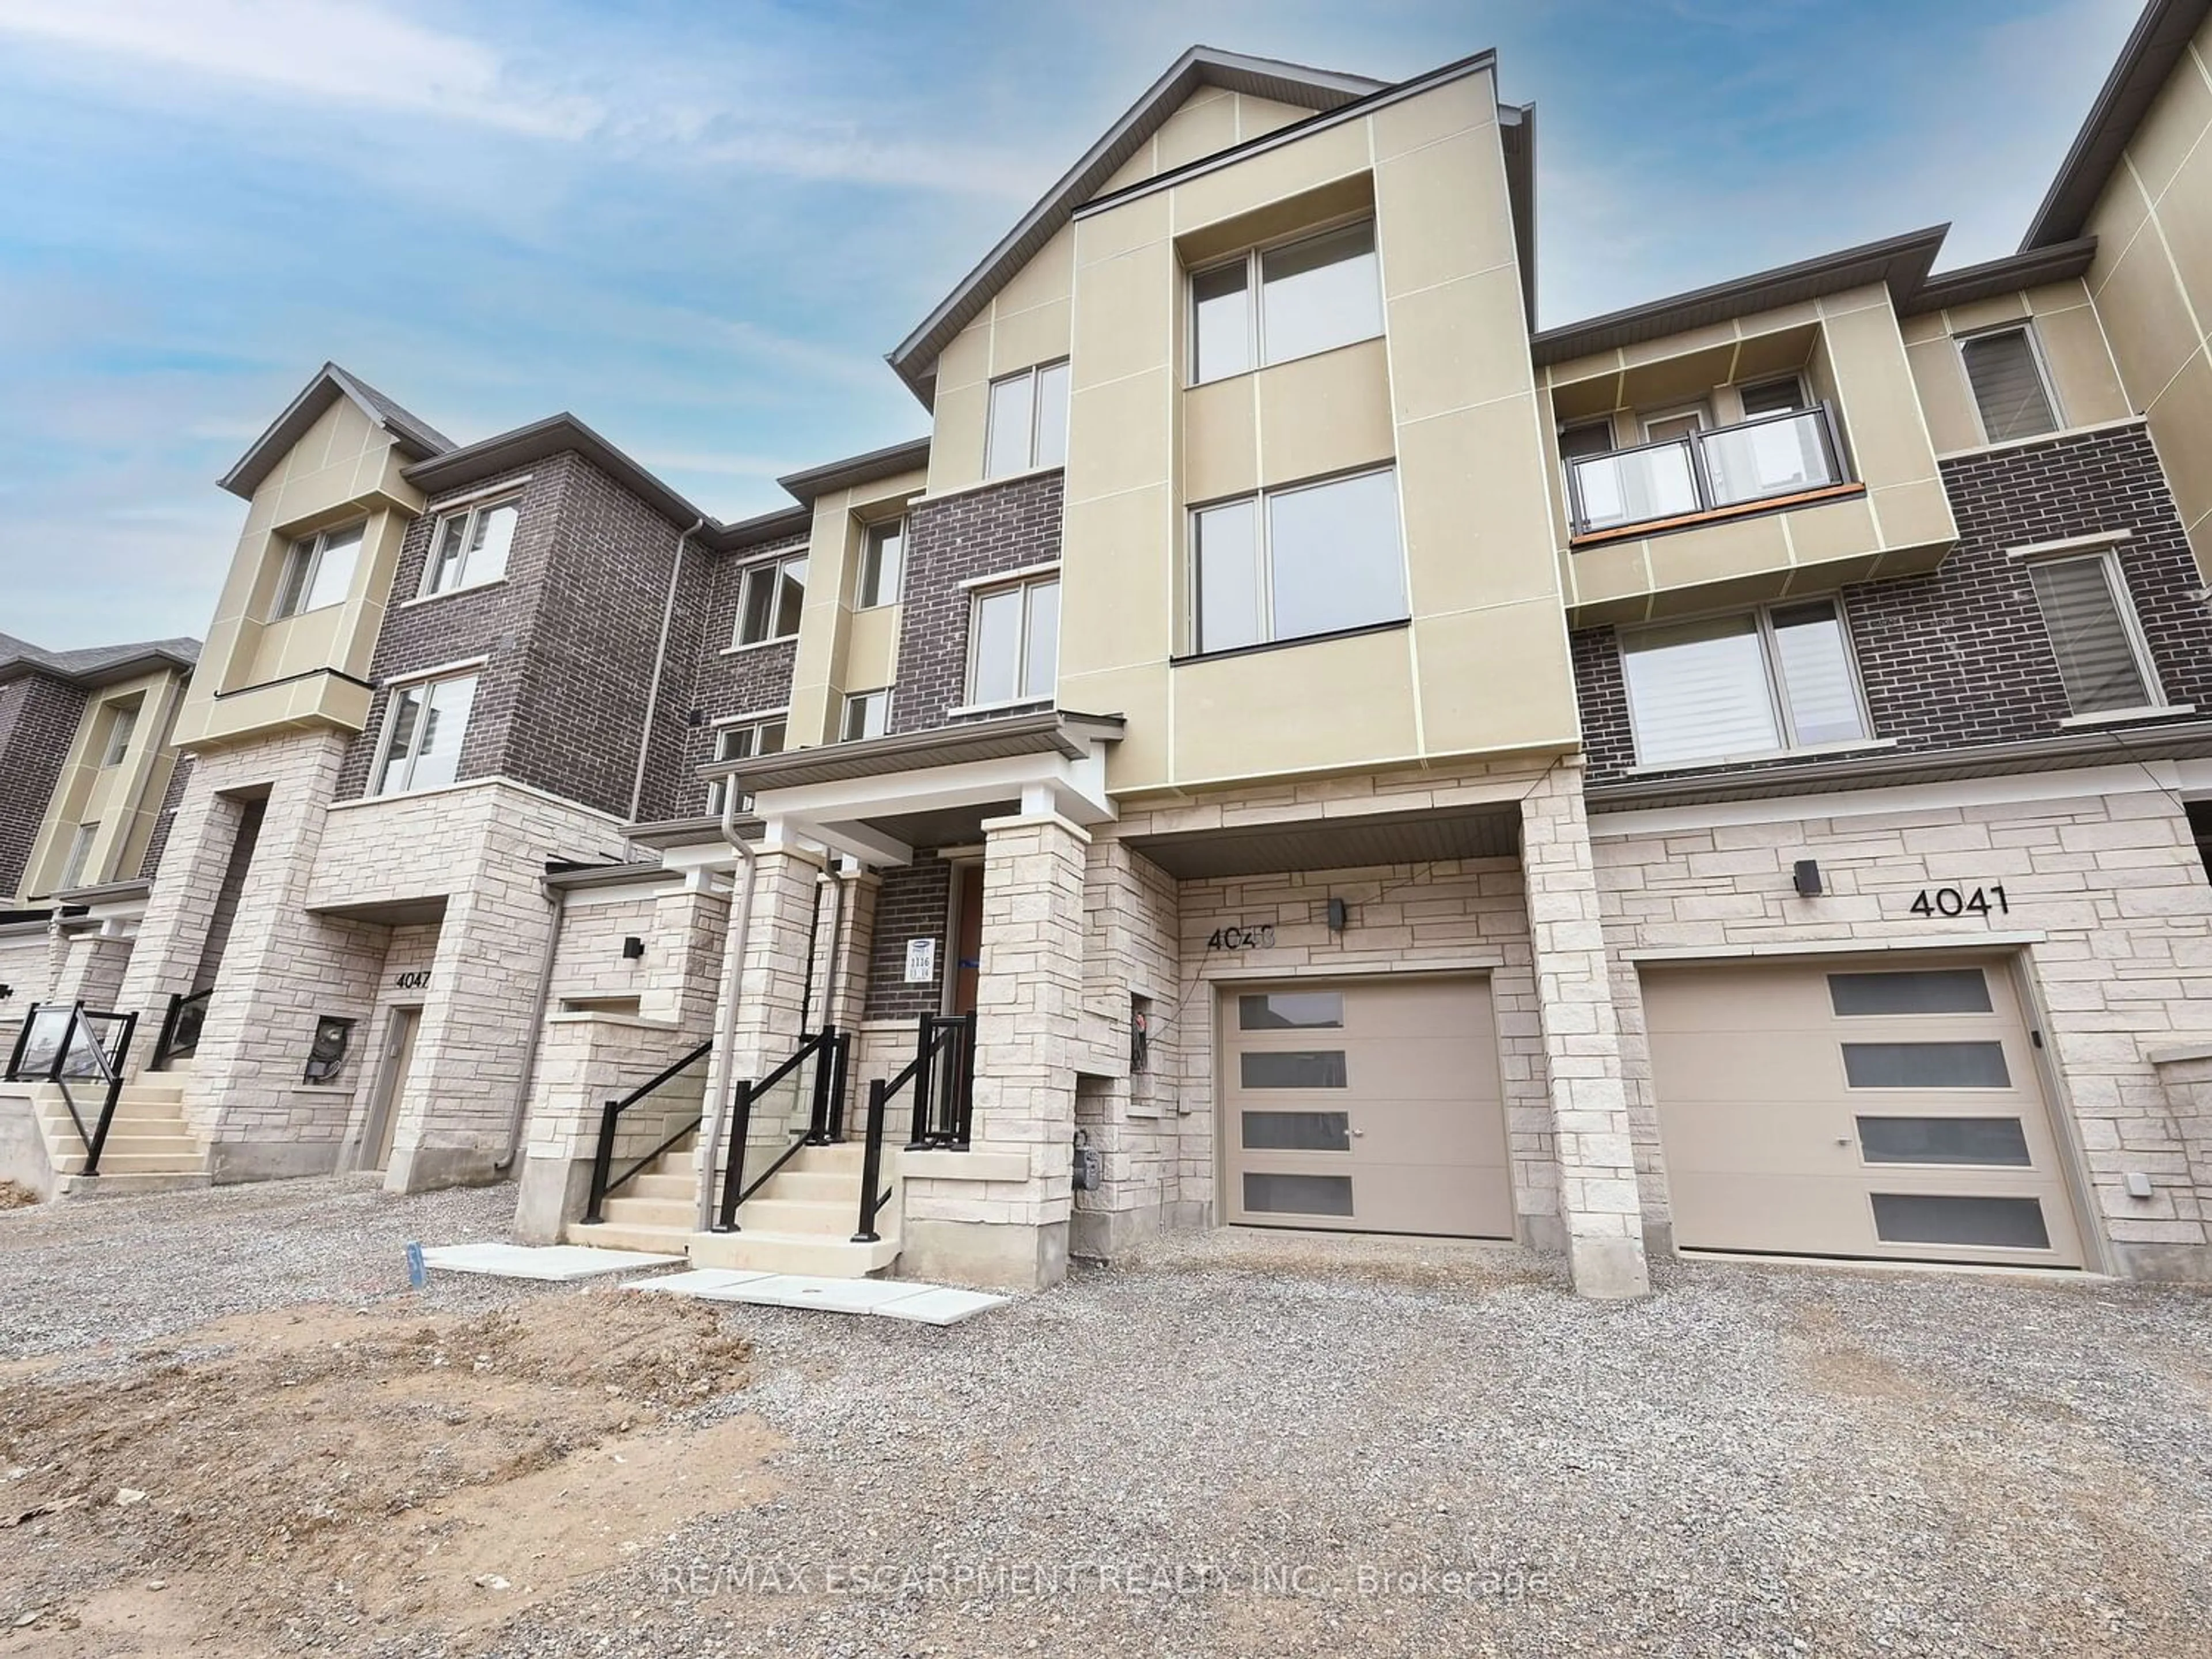 A pic from exterior of the house or condo for 4043 Saida St, Mississauga Ontario L5M 2S8